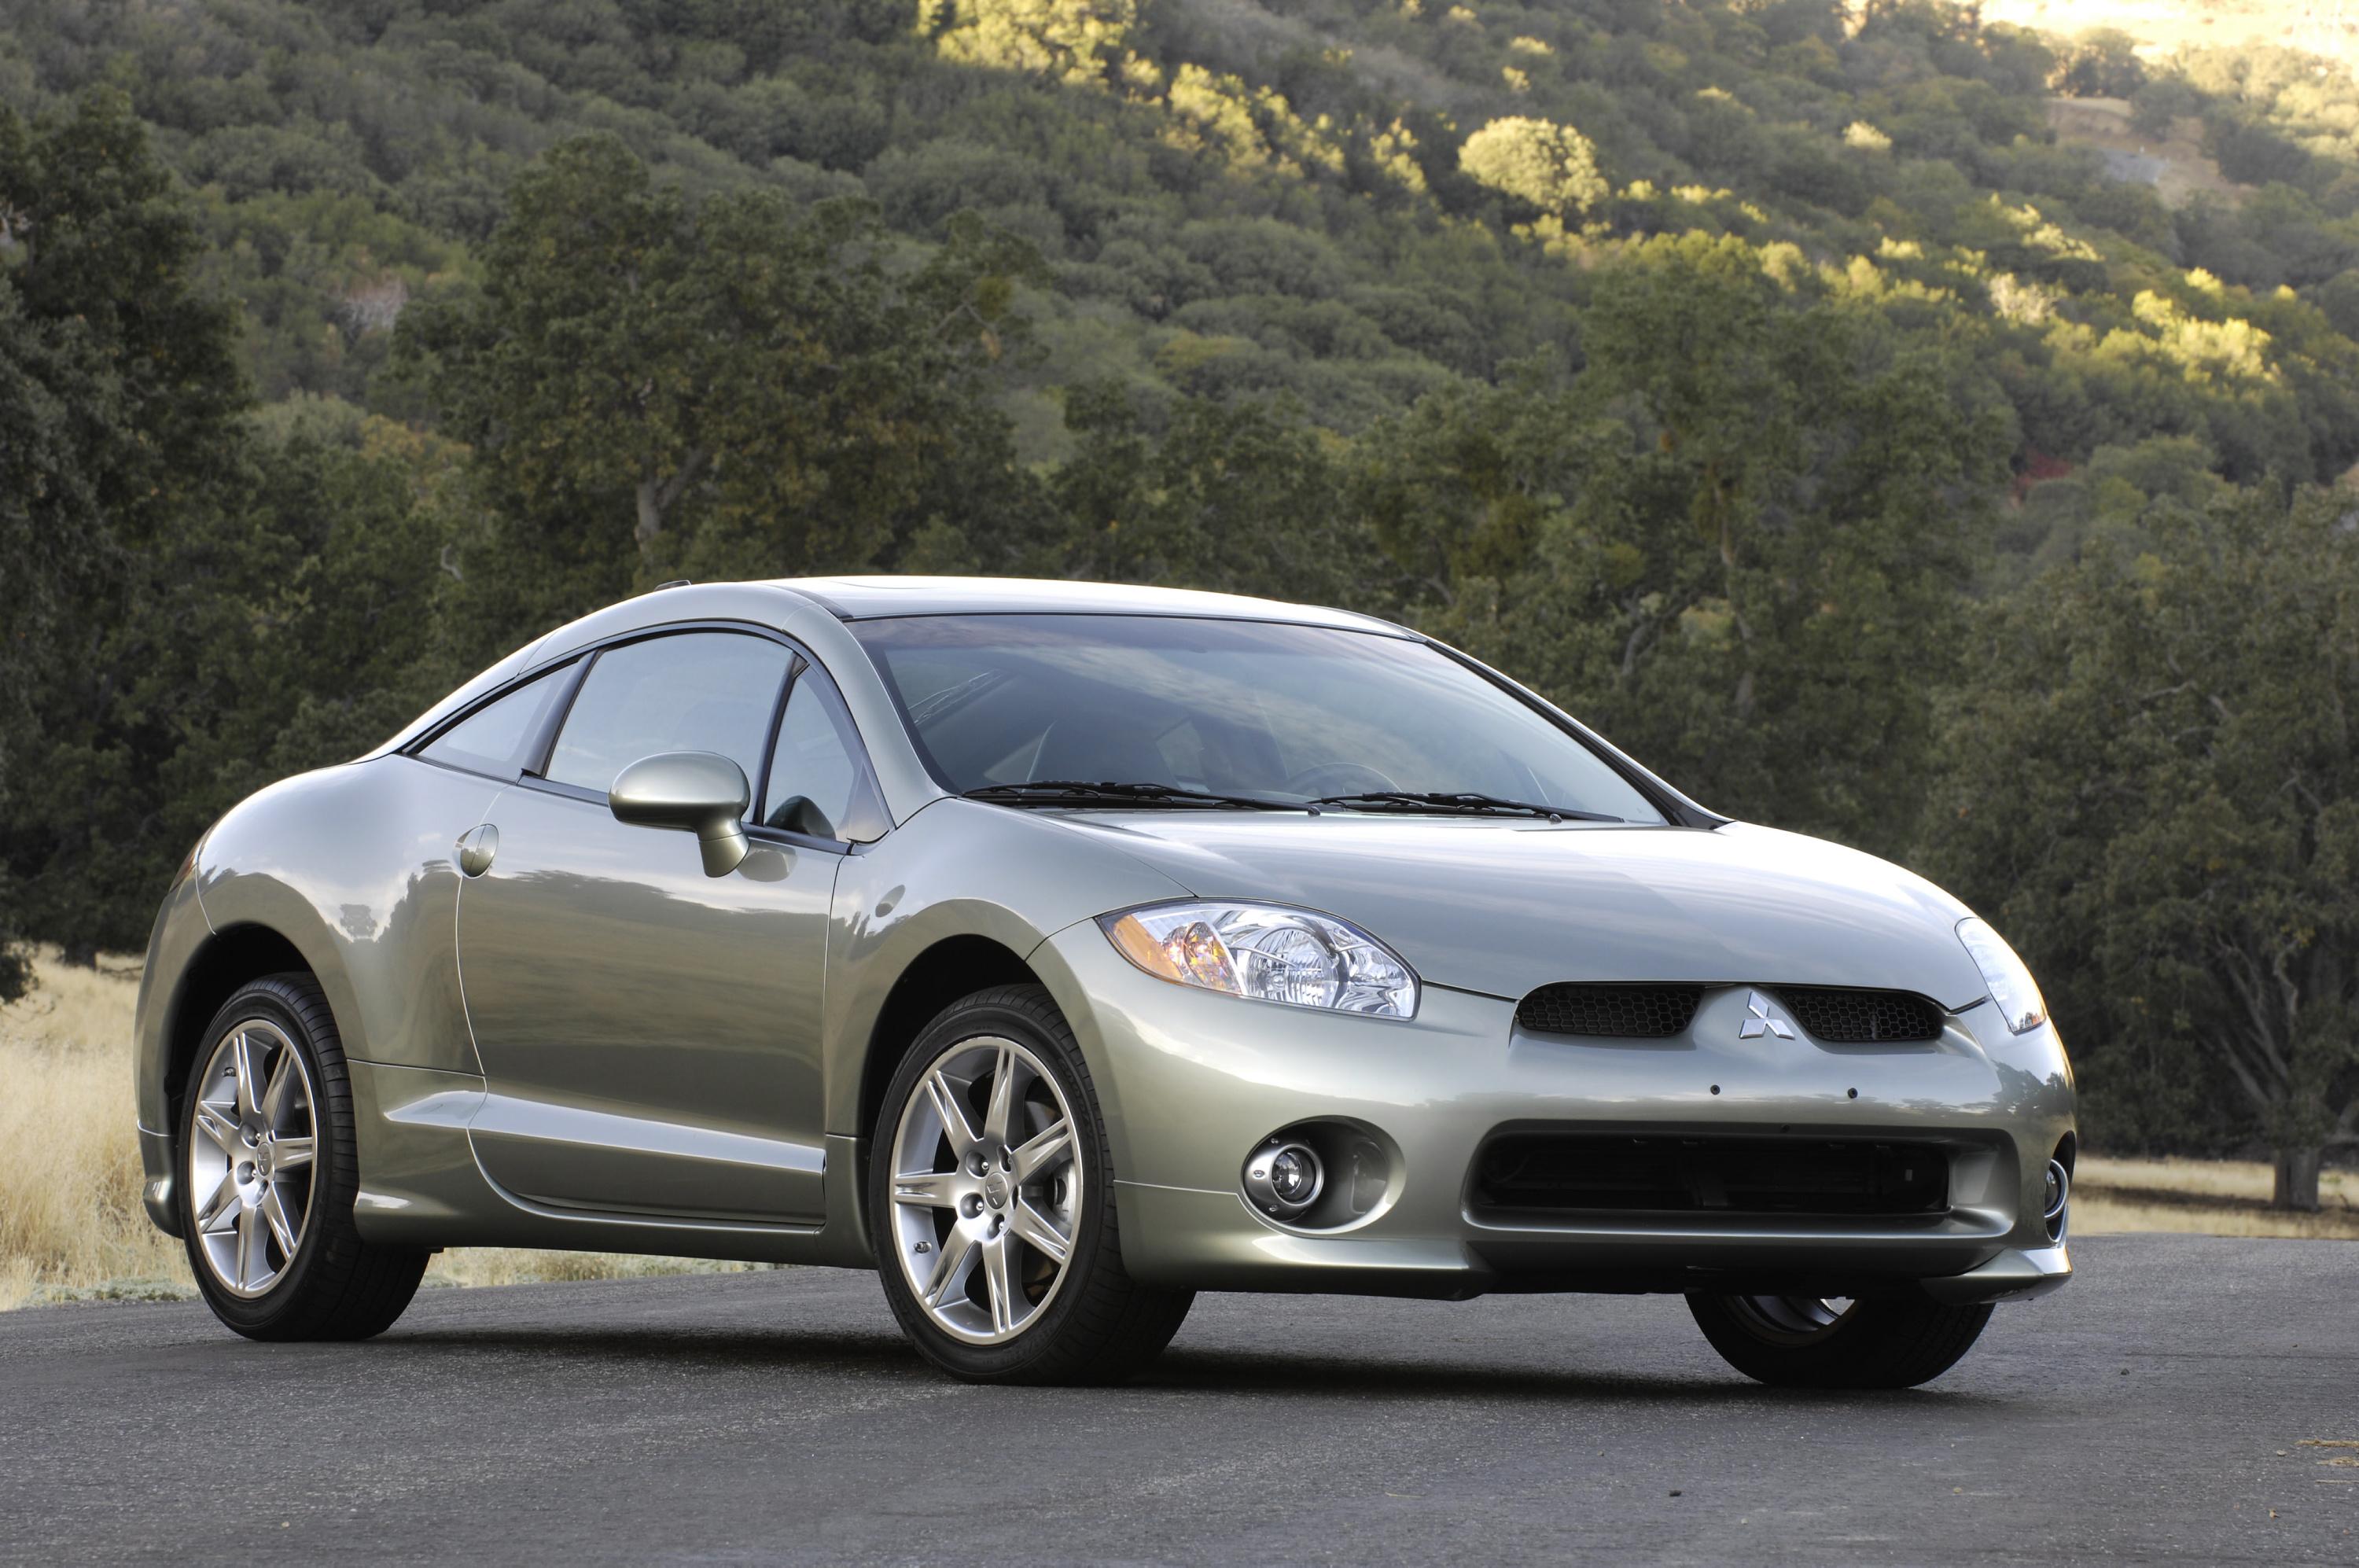 2008 Mitsubishi Eclipse Review - Top Speed